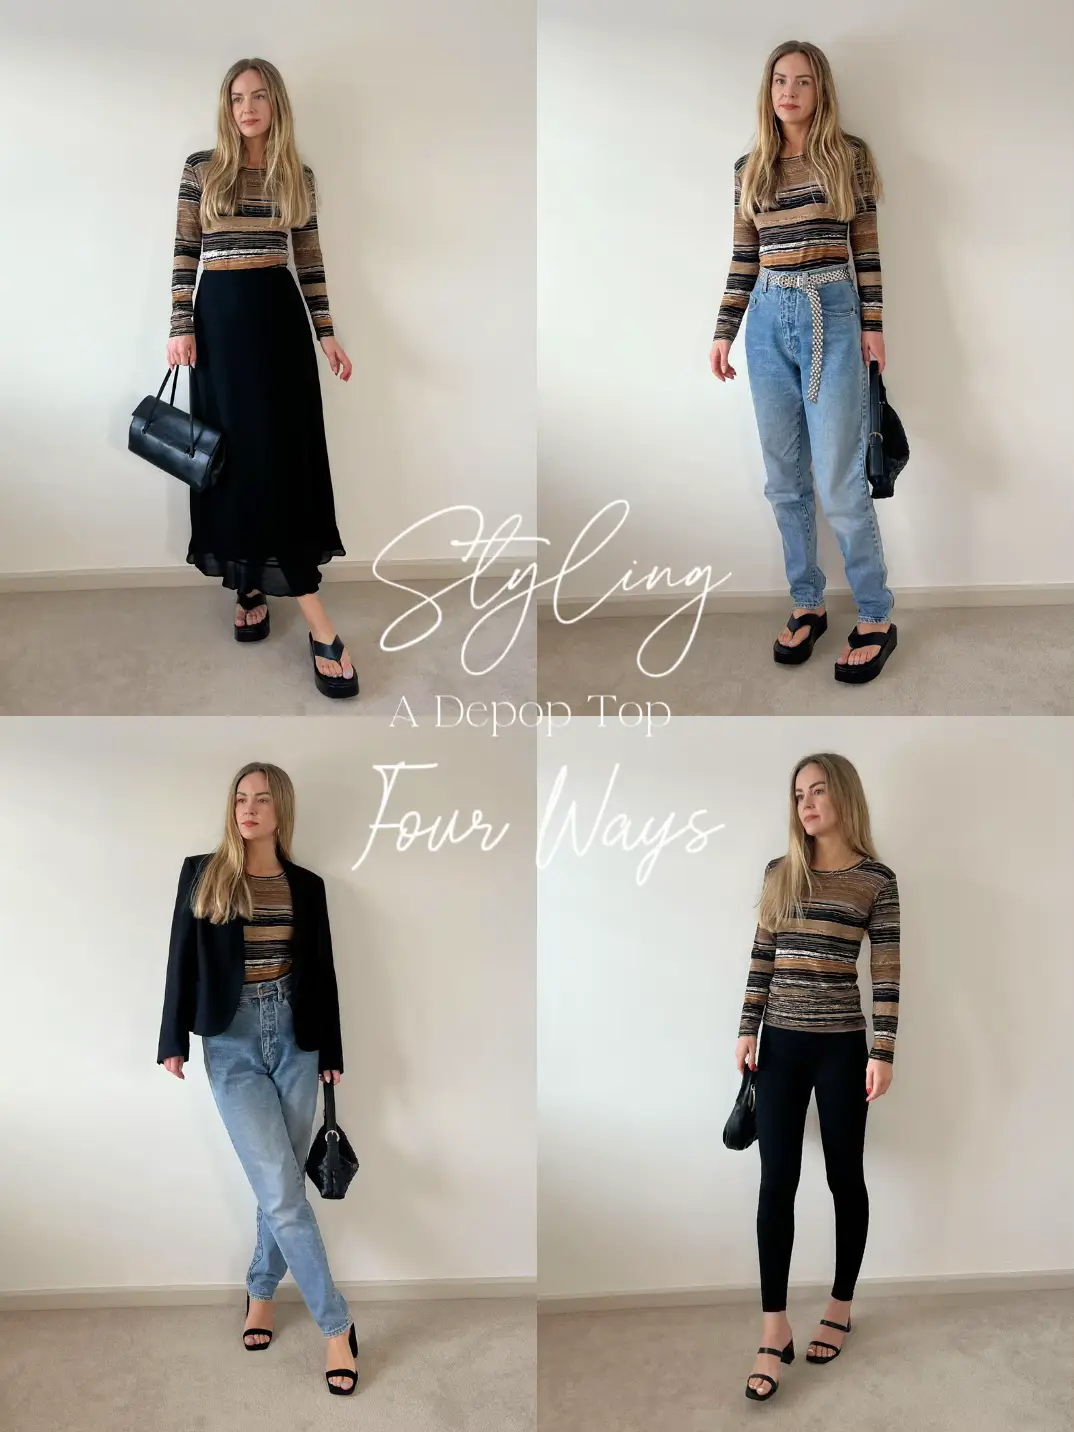 Styling A Depop Top 4 Ways, Gallery posted by Keepitcapsule